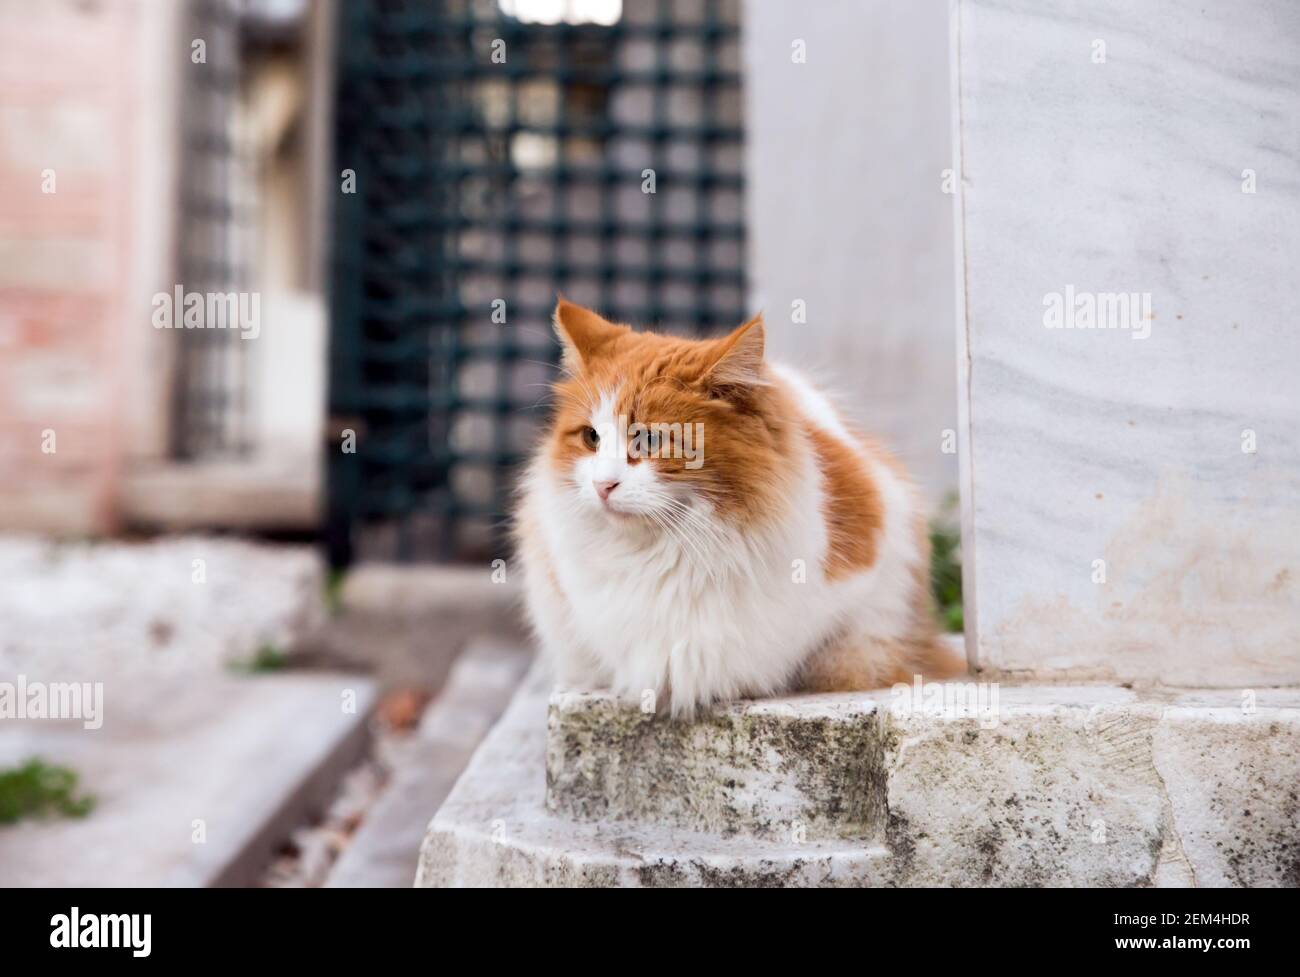 Front portrait of a stray orange tabby cat with long fur, sitting at a historic graveyard, looking away from lens. Stock Photo